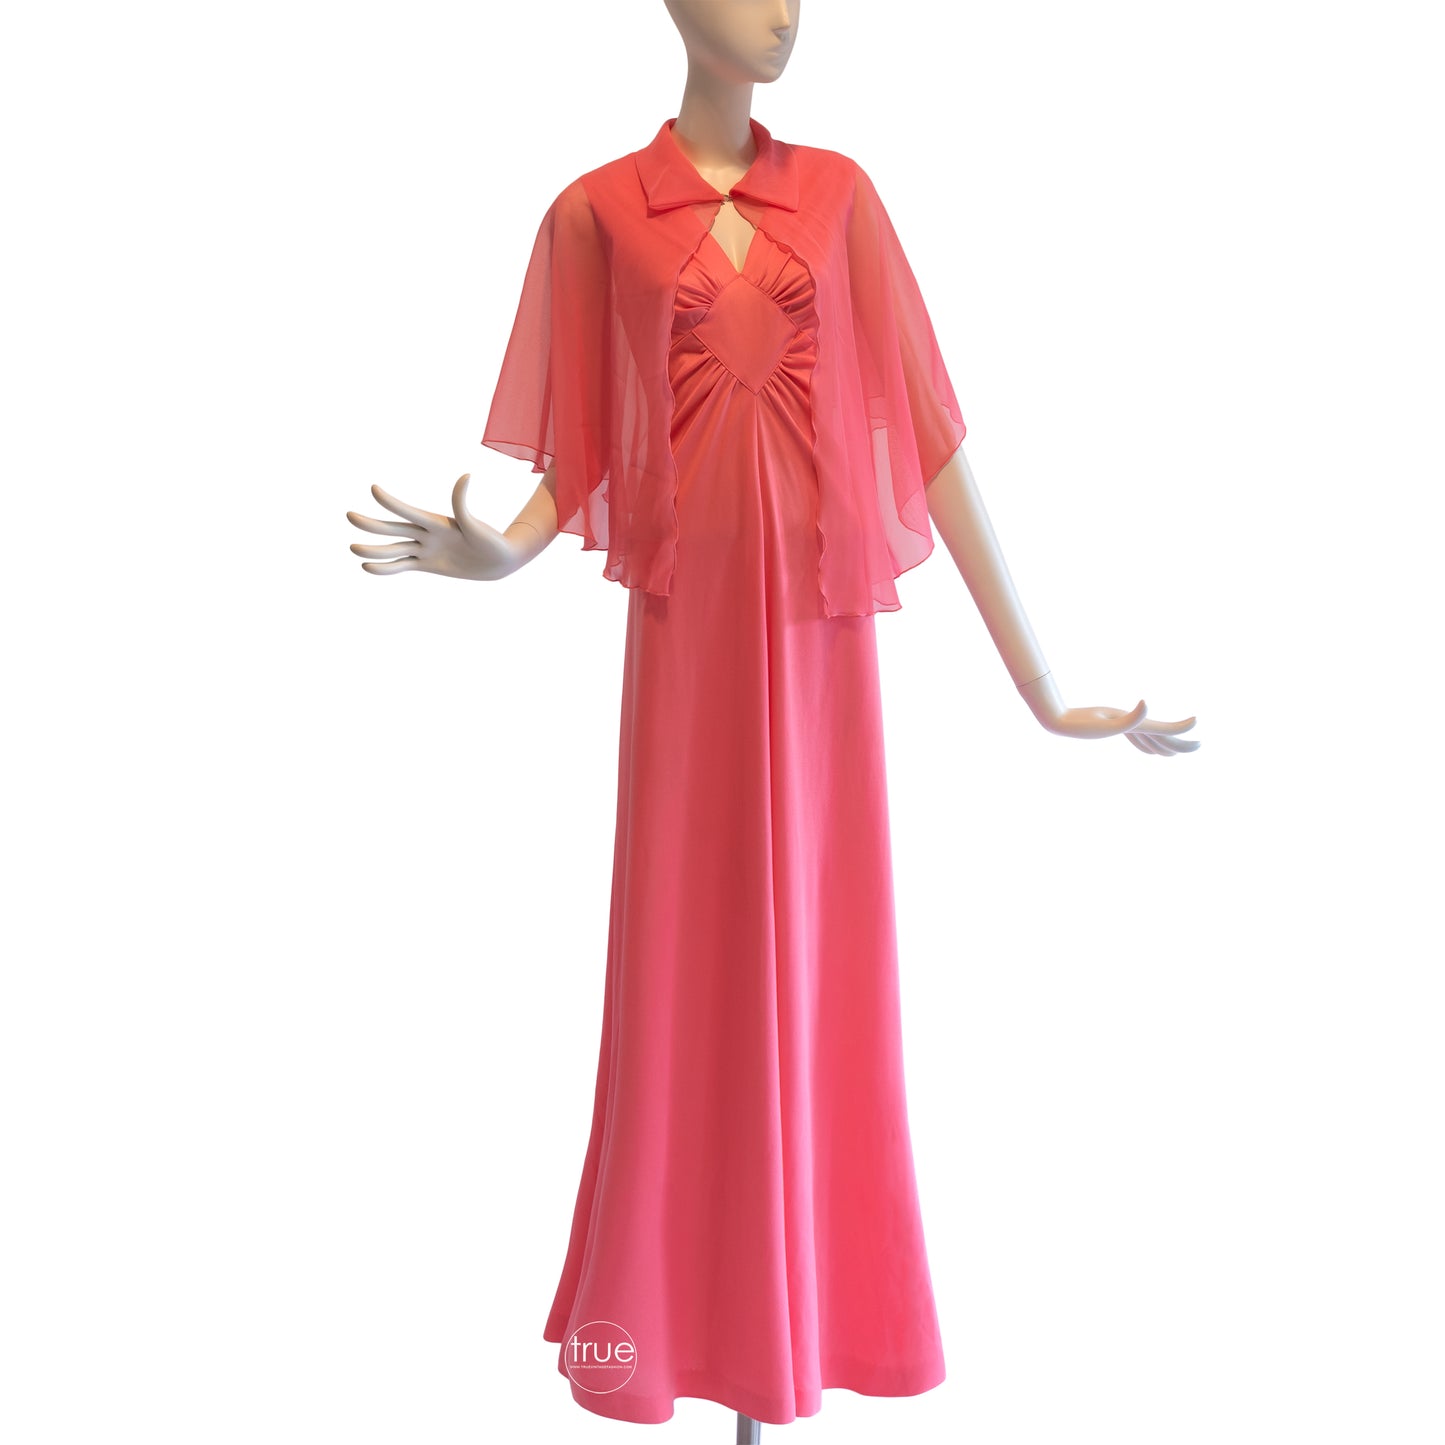 vintage 1970's dress ...slinky coral dream maxi dress with sheer capelet